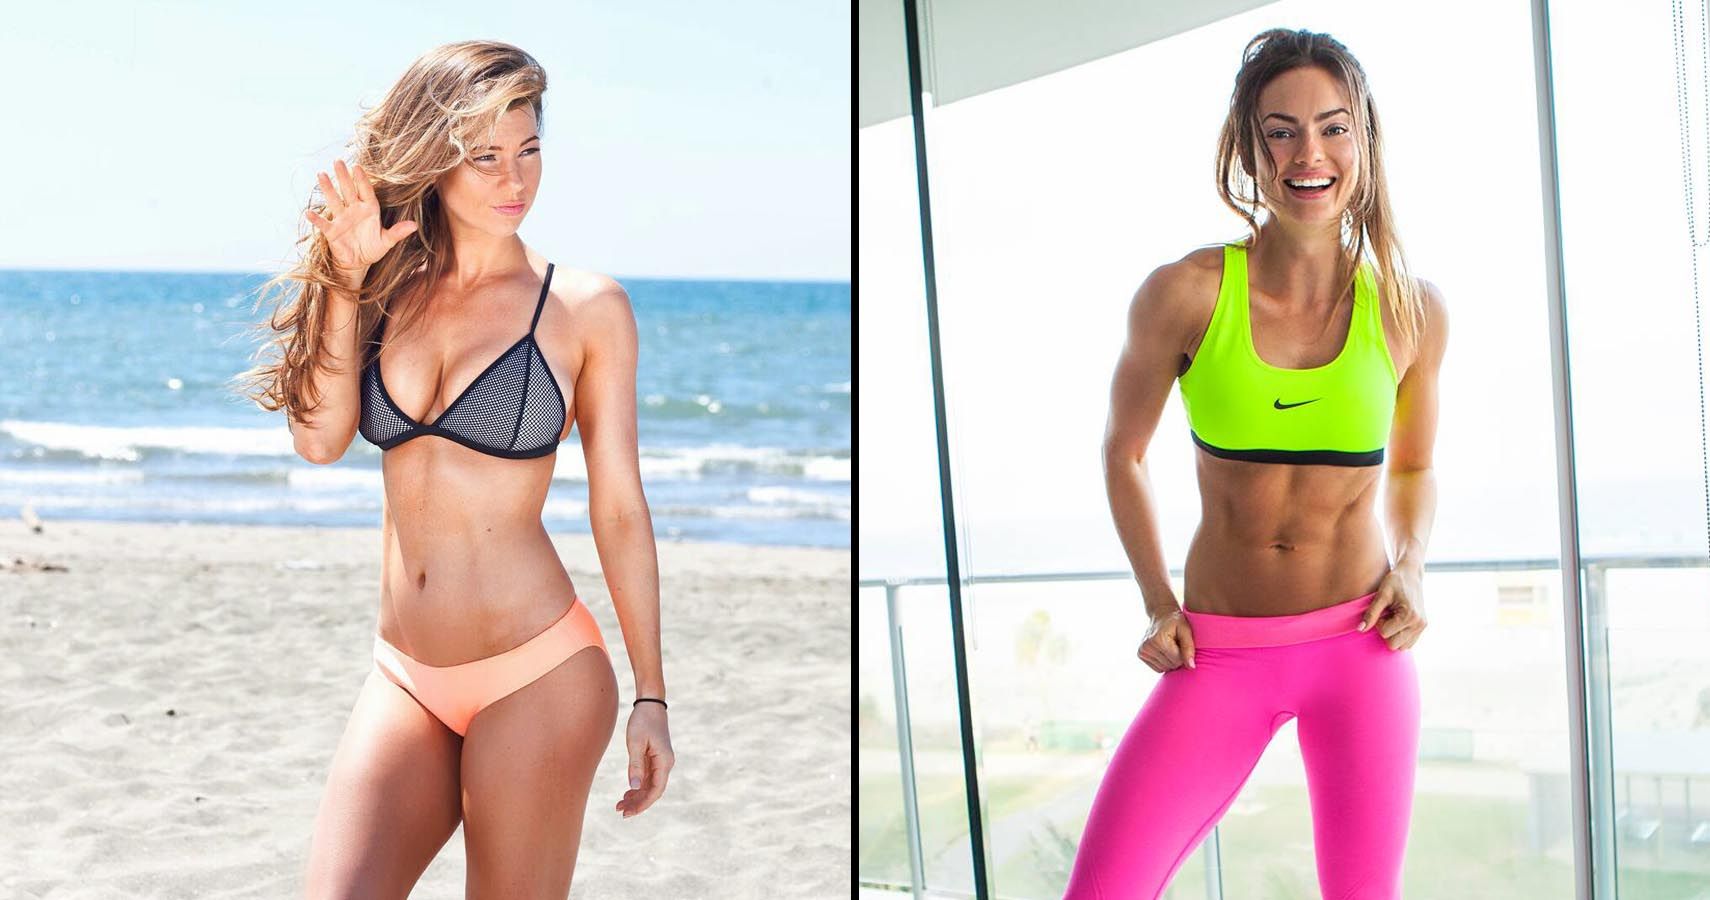 Top 15 Sexiest Fitness Babes On Instagram And Snapchat 5490